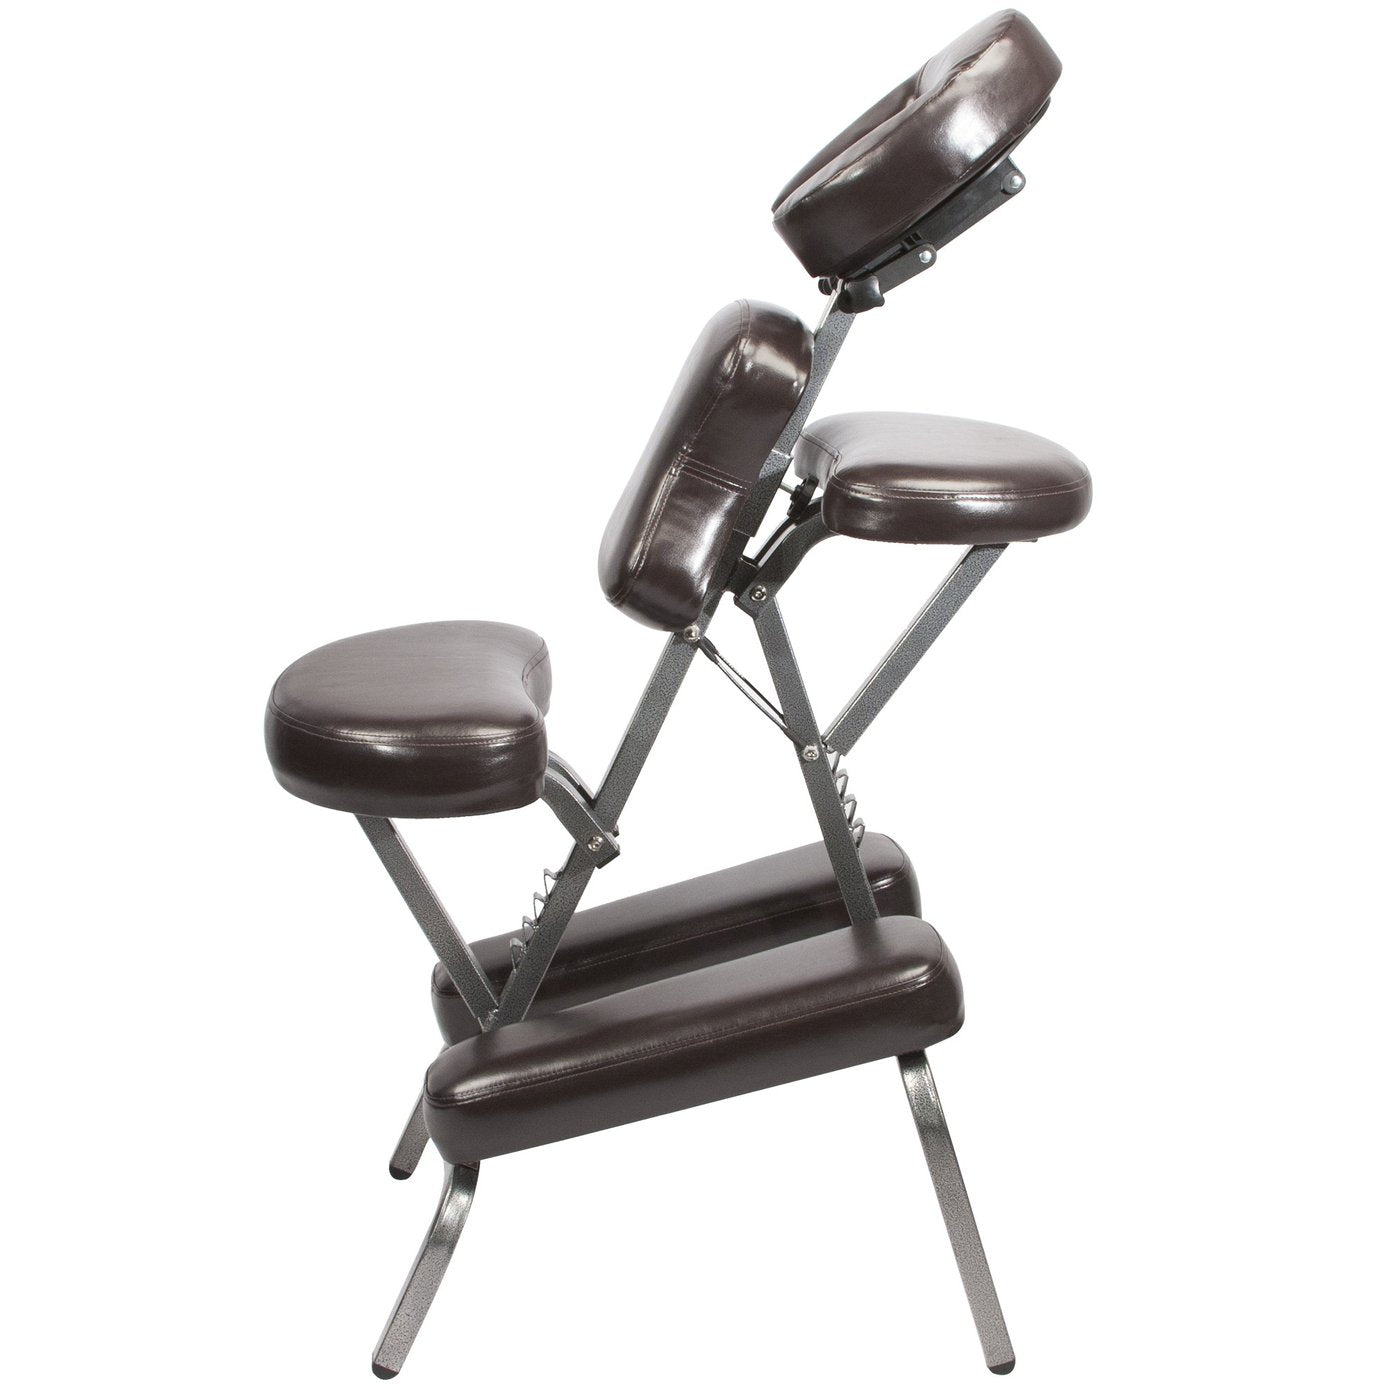 Bella2bello BEDFORD™ Portable Massage Chair Package - Starter Chair, Coffee Luster